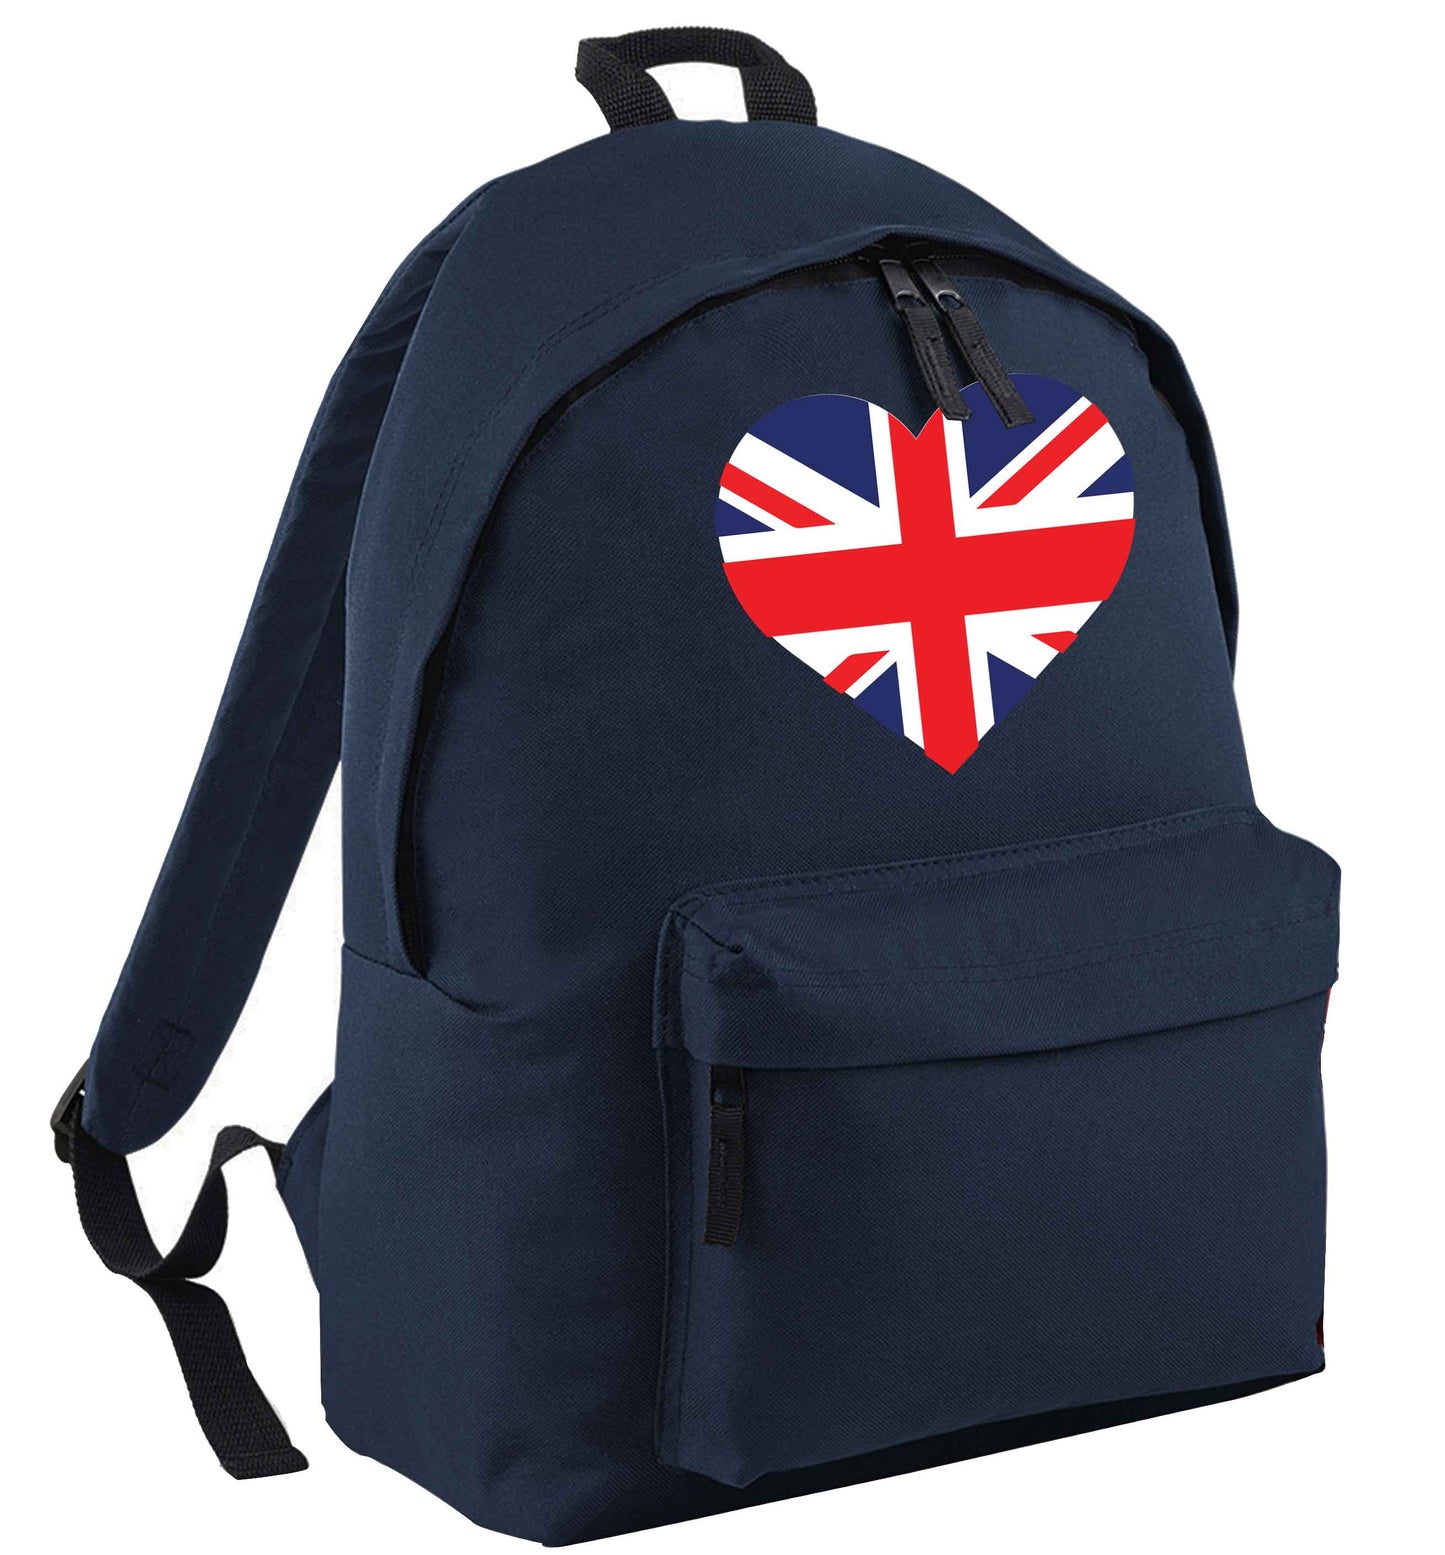 Union Jack Heart navy adults backpack